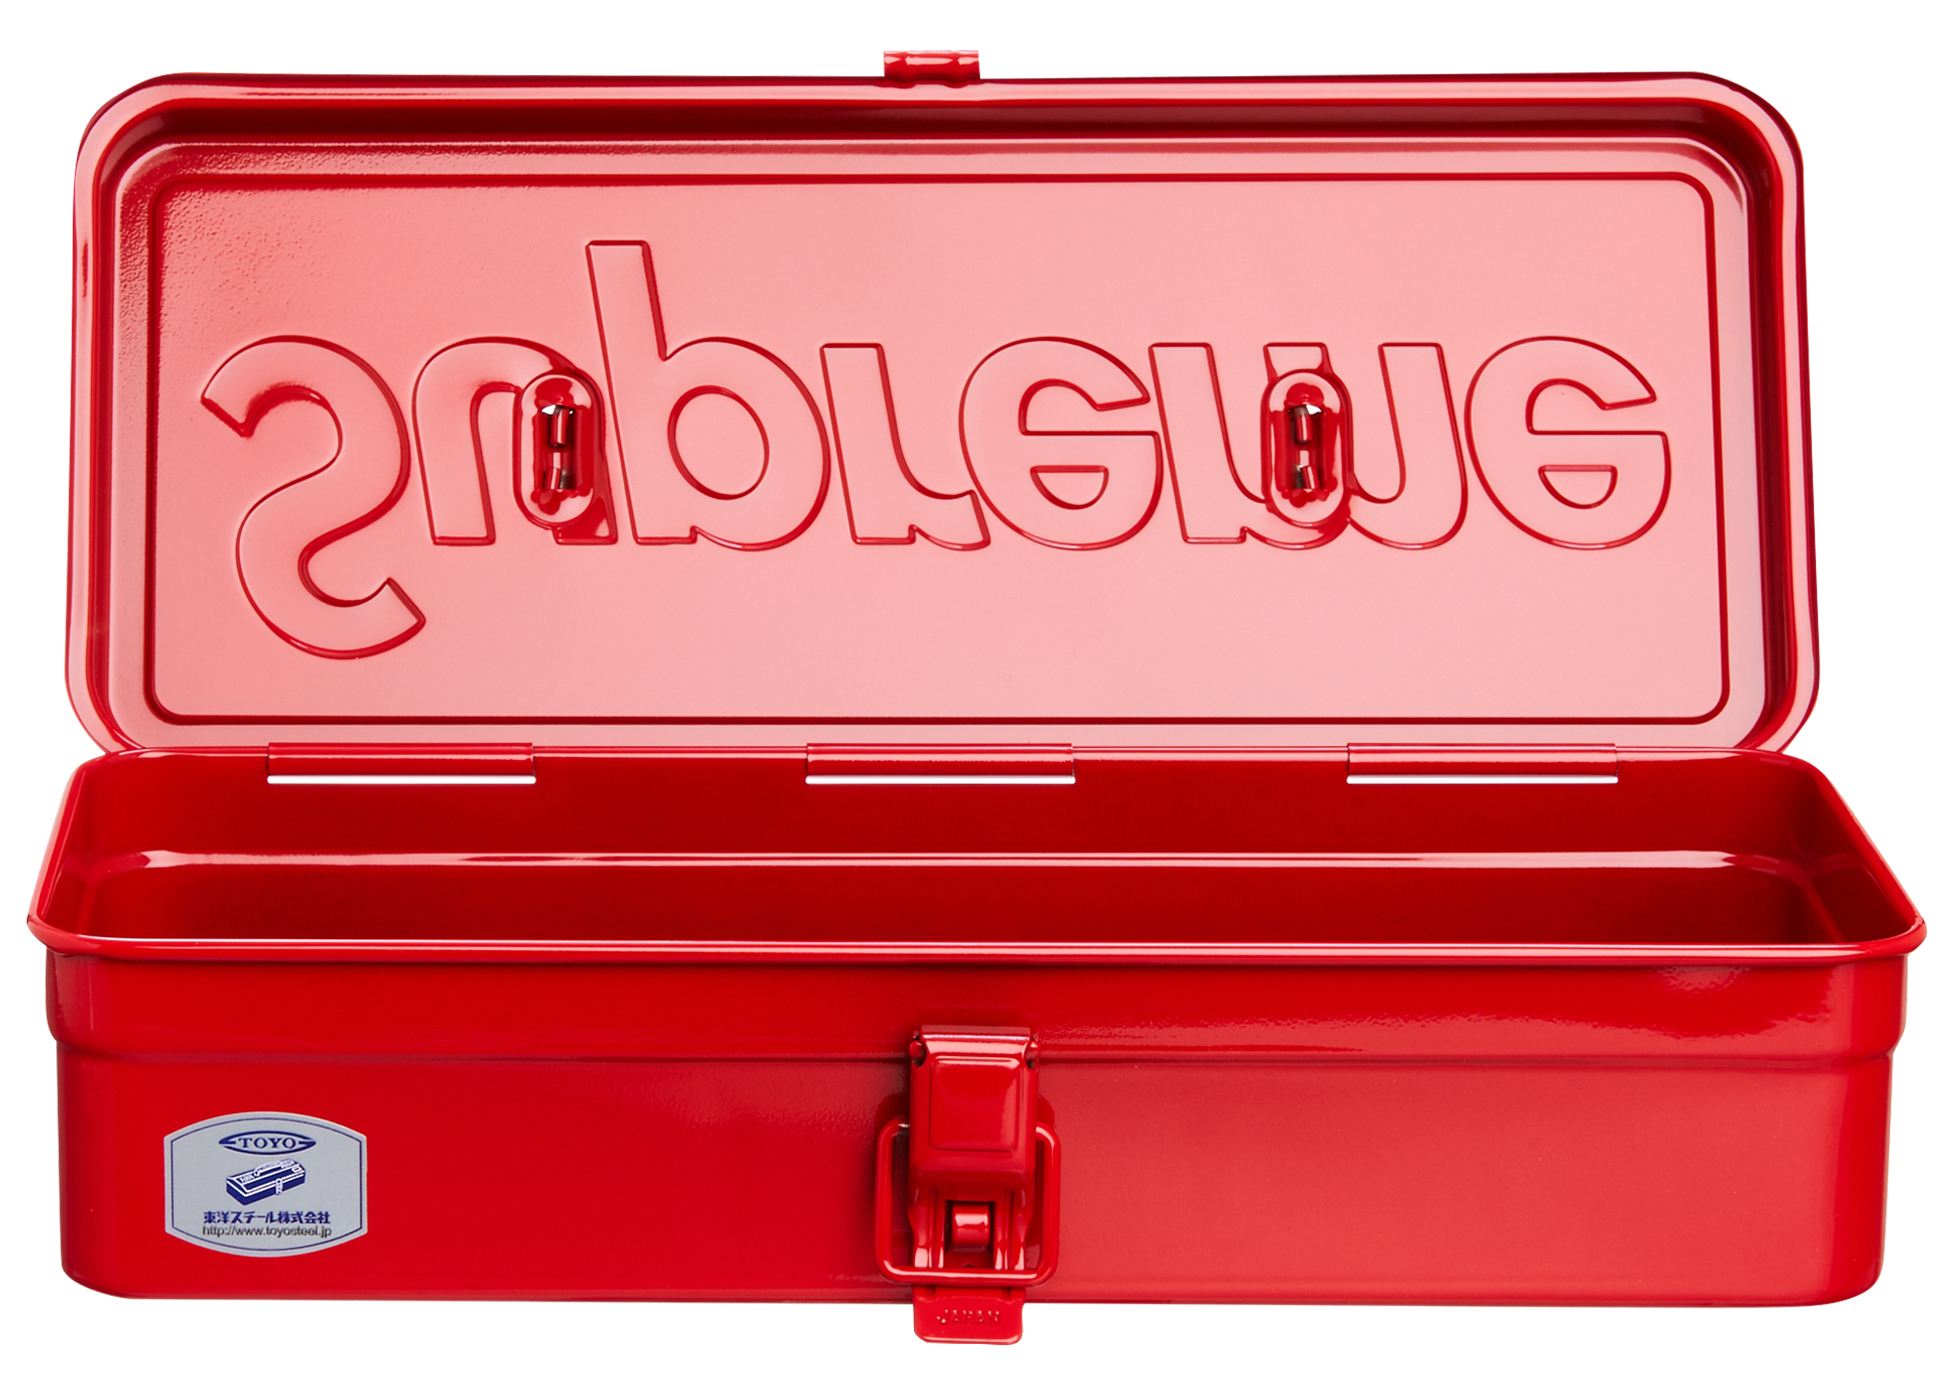 Supreme TOYO Steel T-320 Toolbox Red - FW22 - US